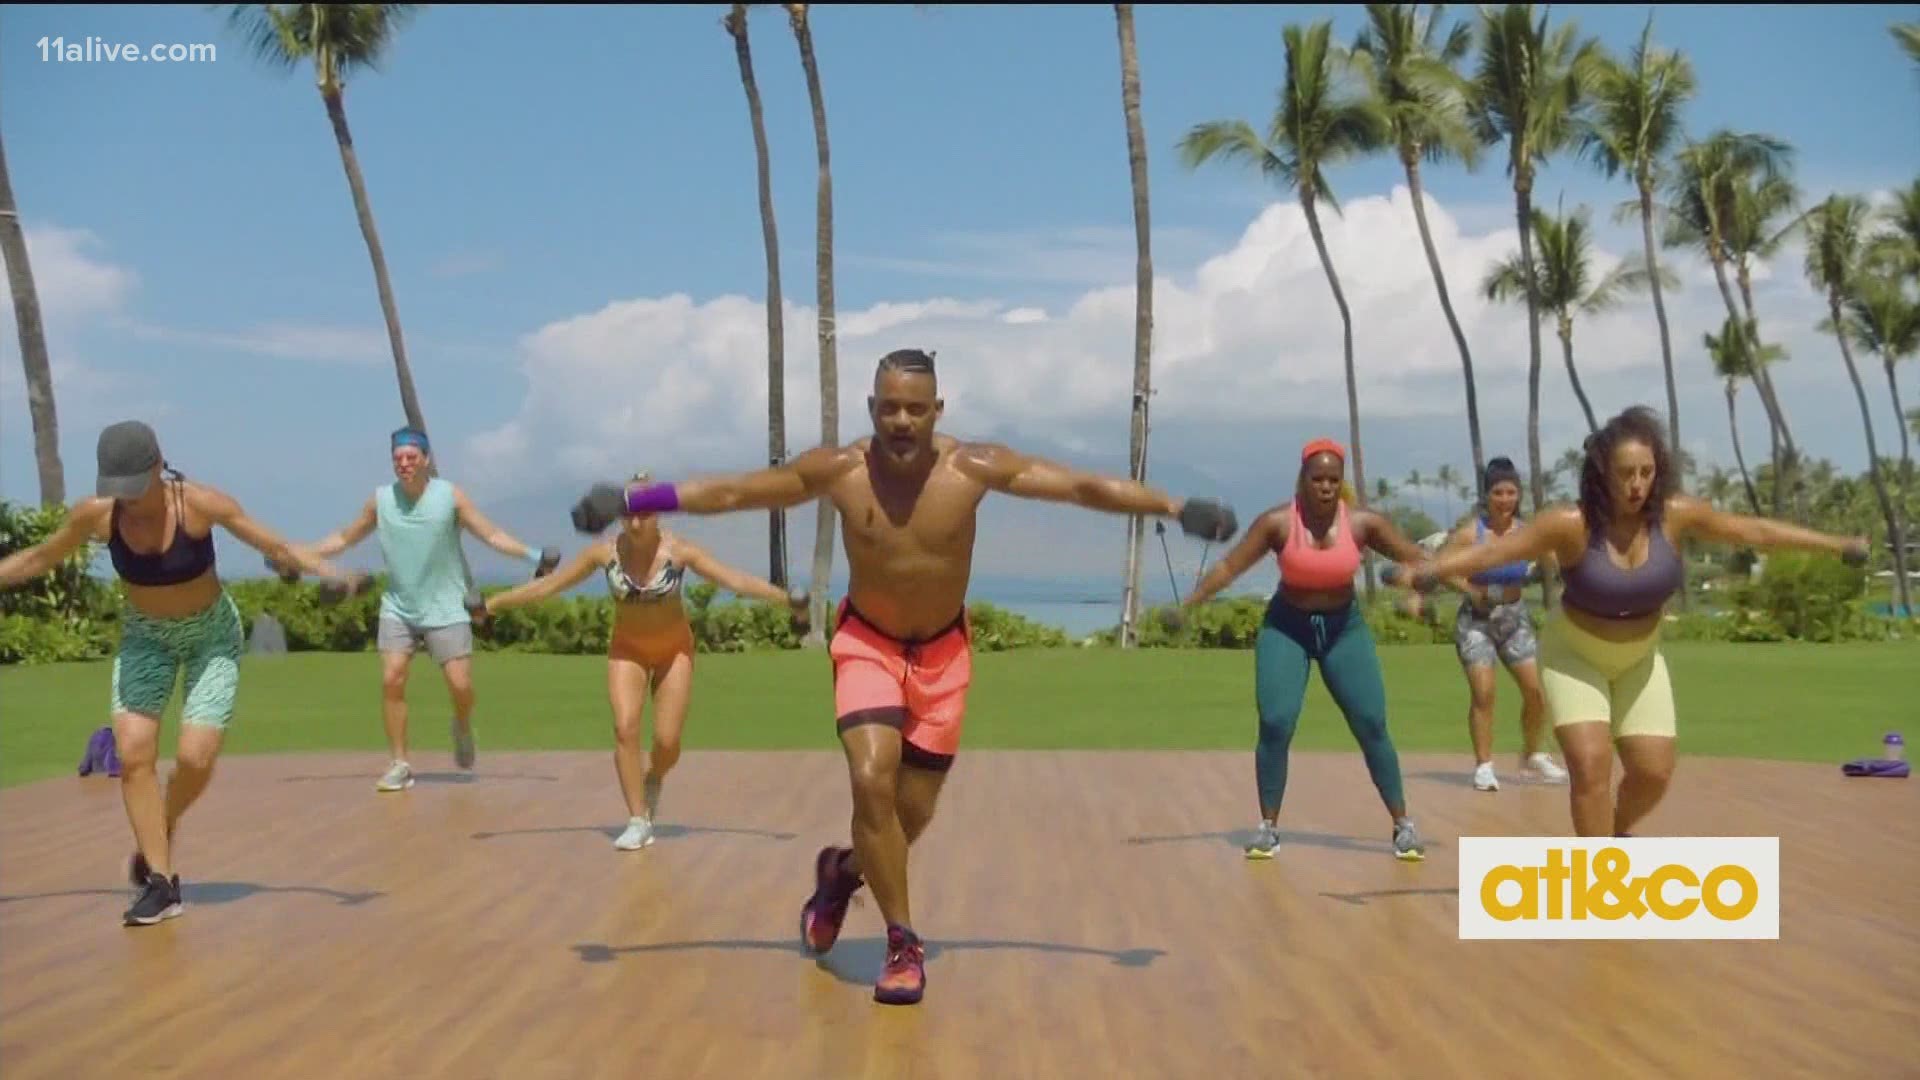 Let's Get UP! Fitness guru Shaun T previews his latest on-demand workout series.